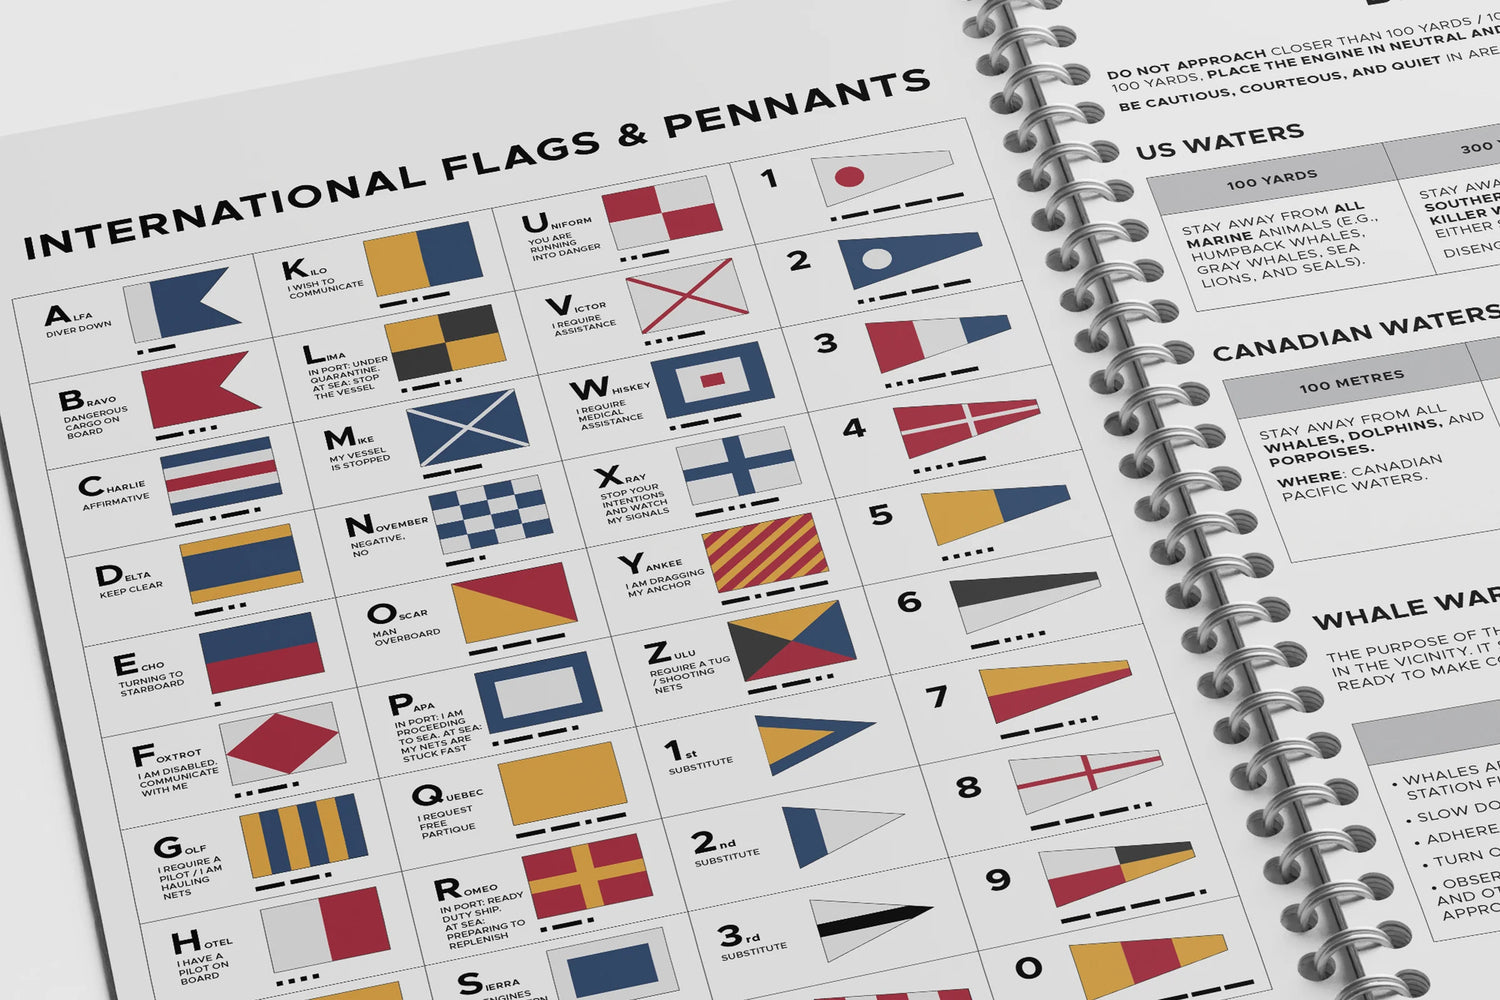 Photo: Reference guide of International code flags